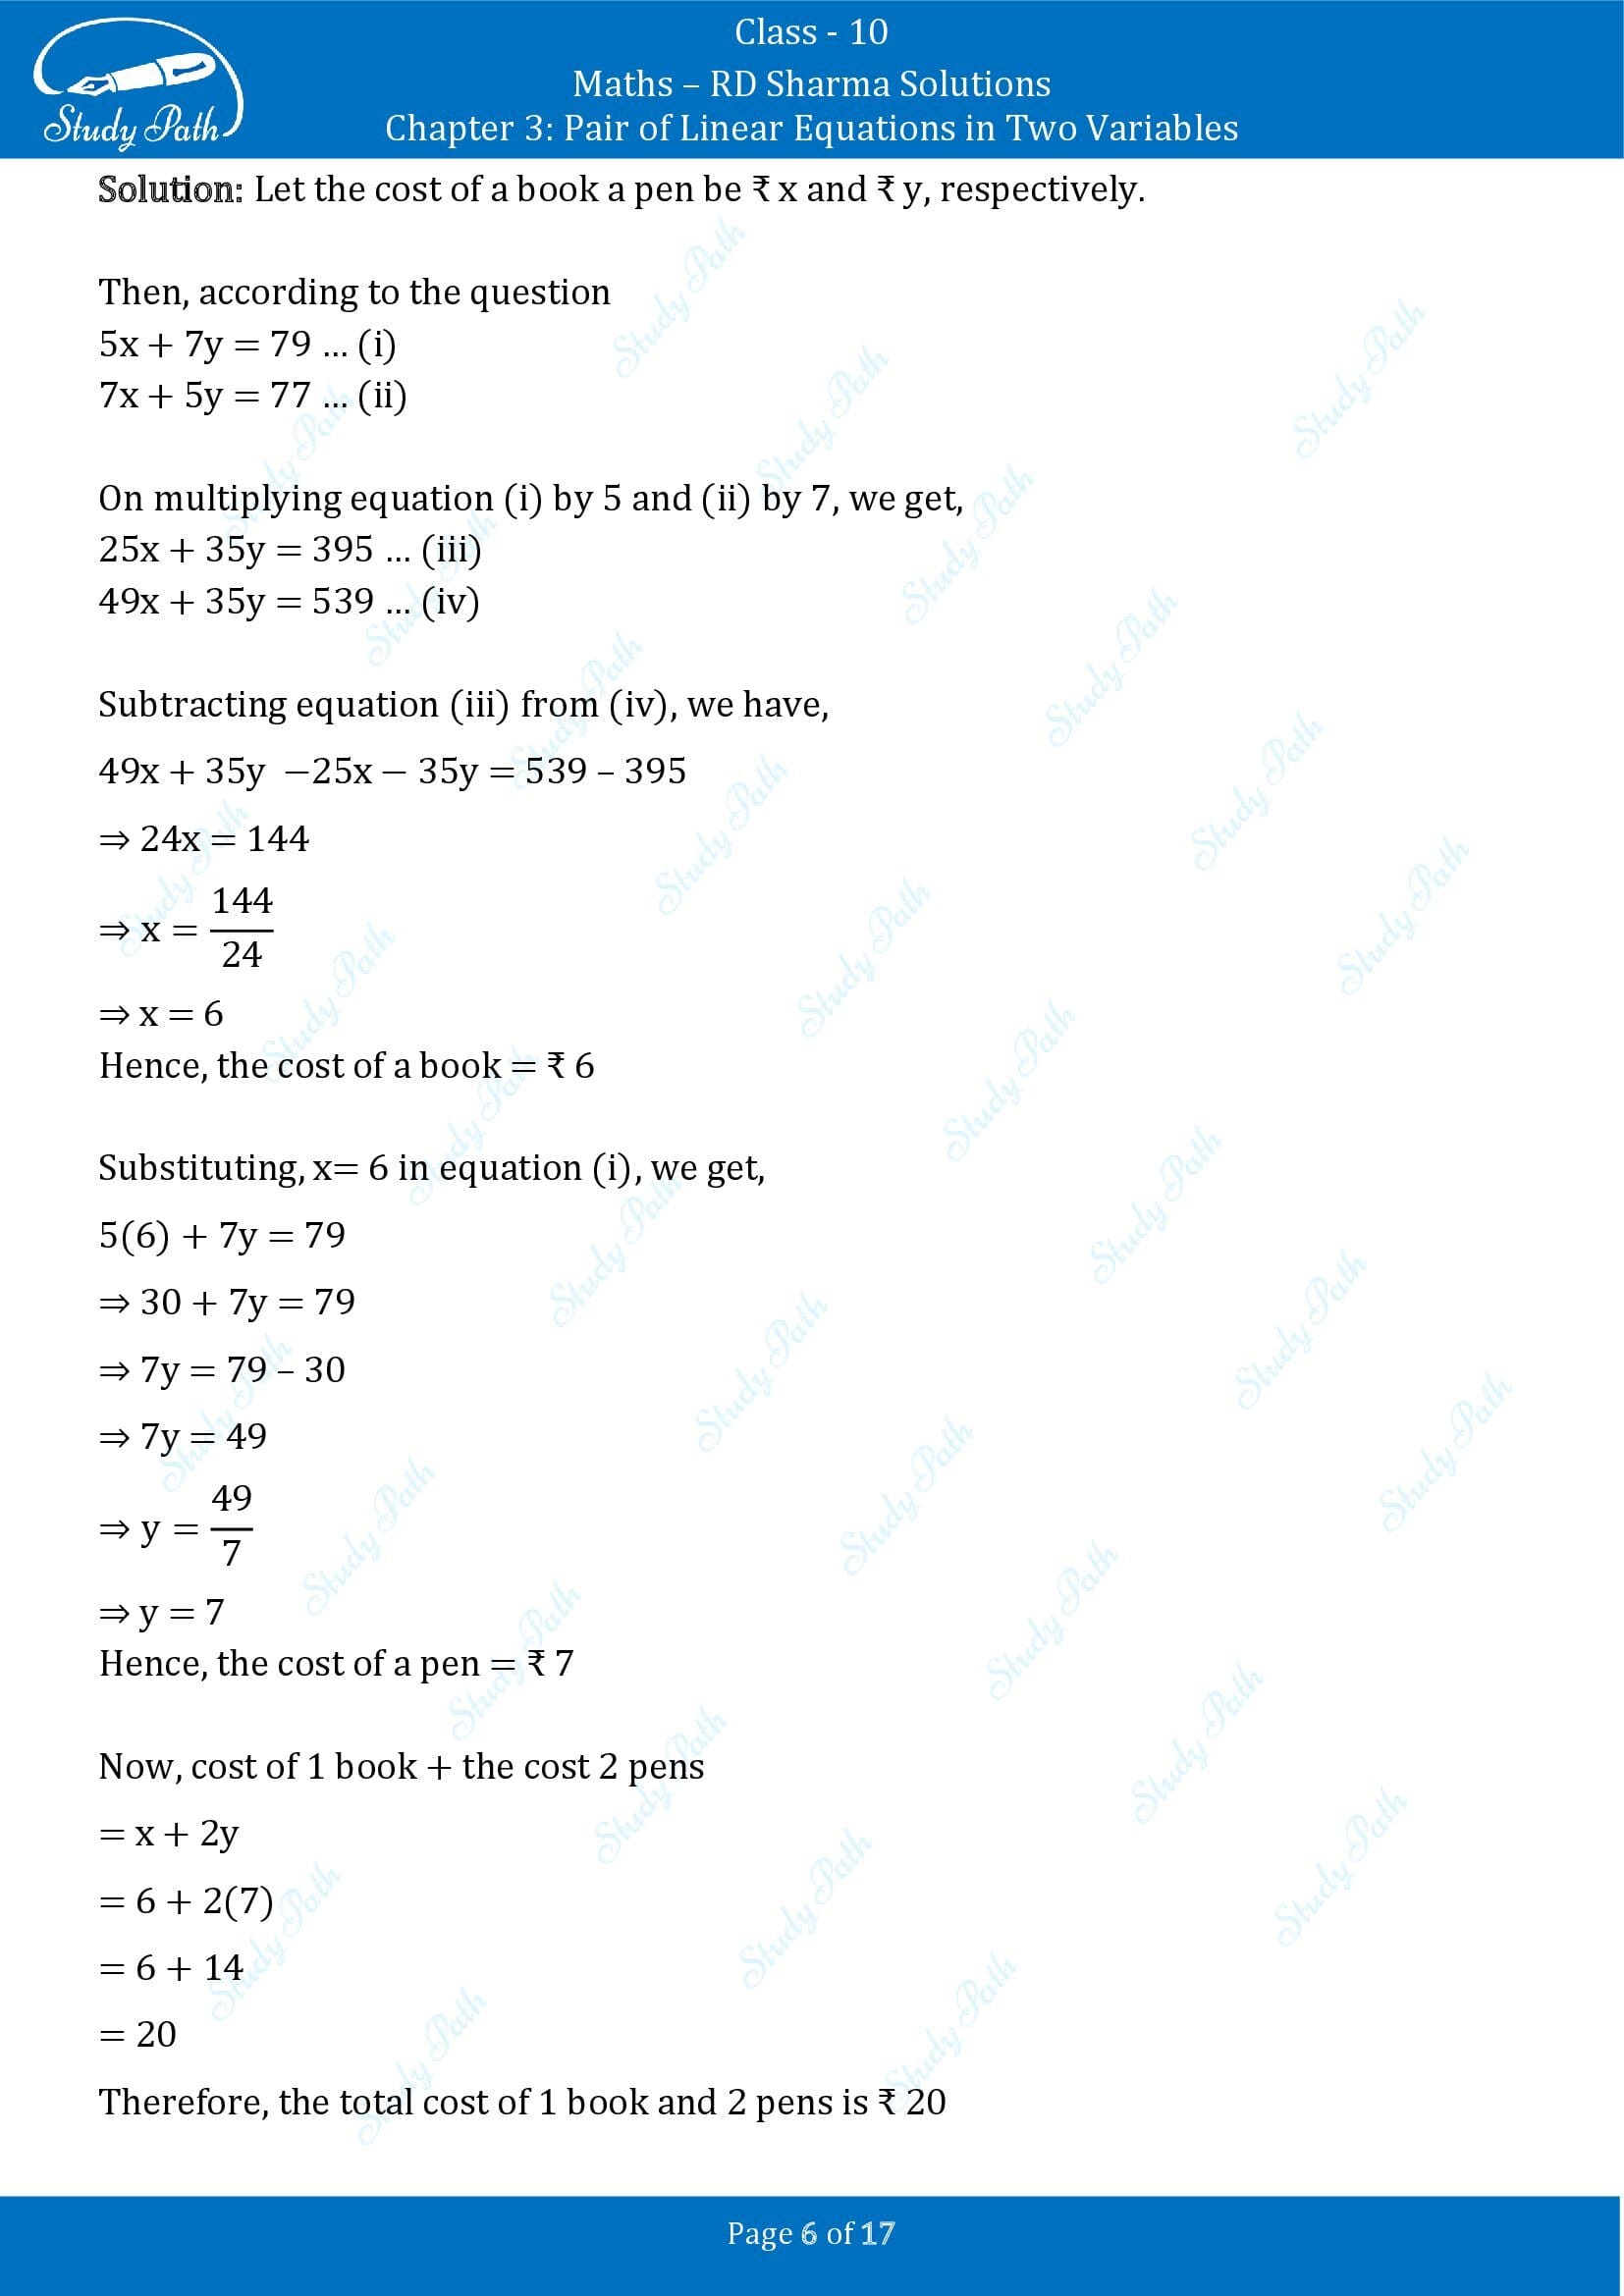 RD Sharma Solutions Class 10 Chapter 3 Pair of Linear Equations in Two Variables Exercise 3.6 00006